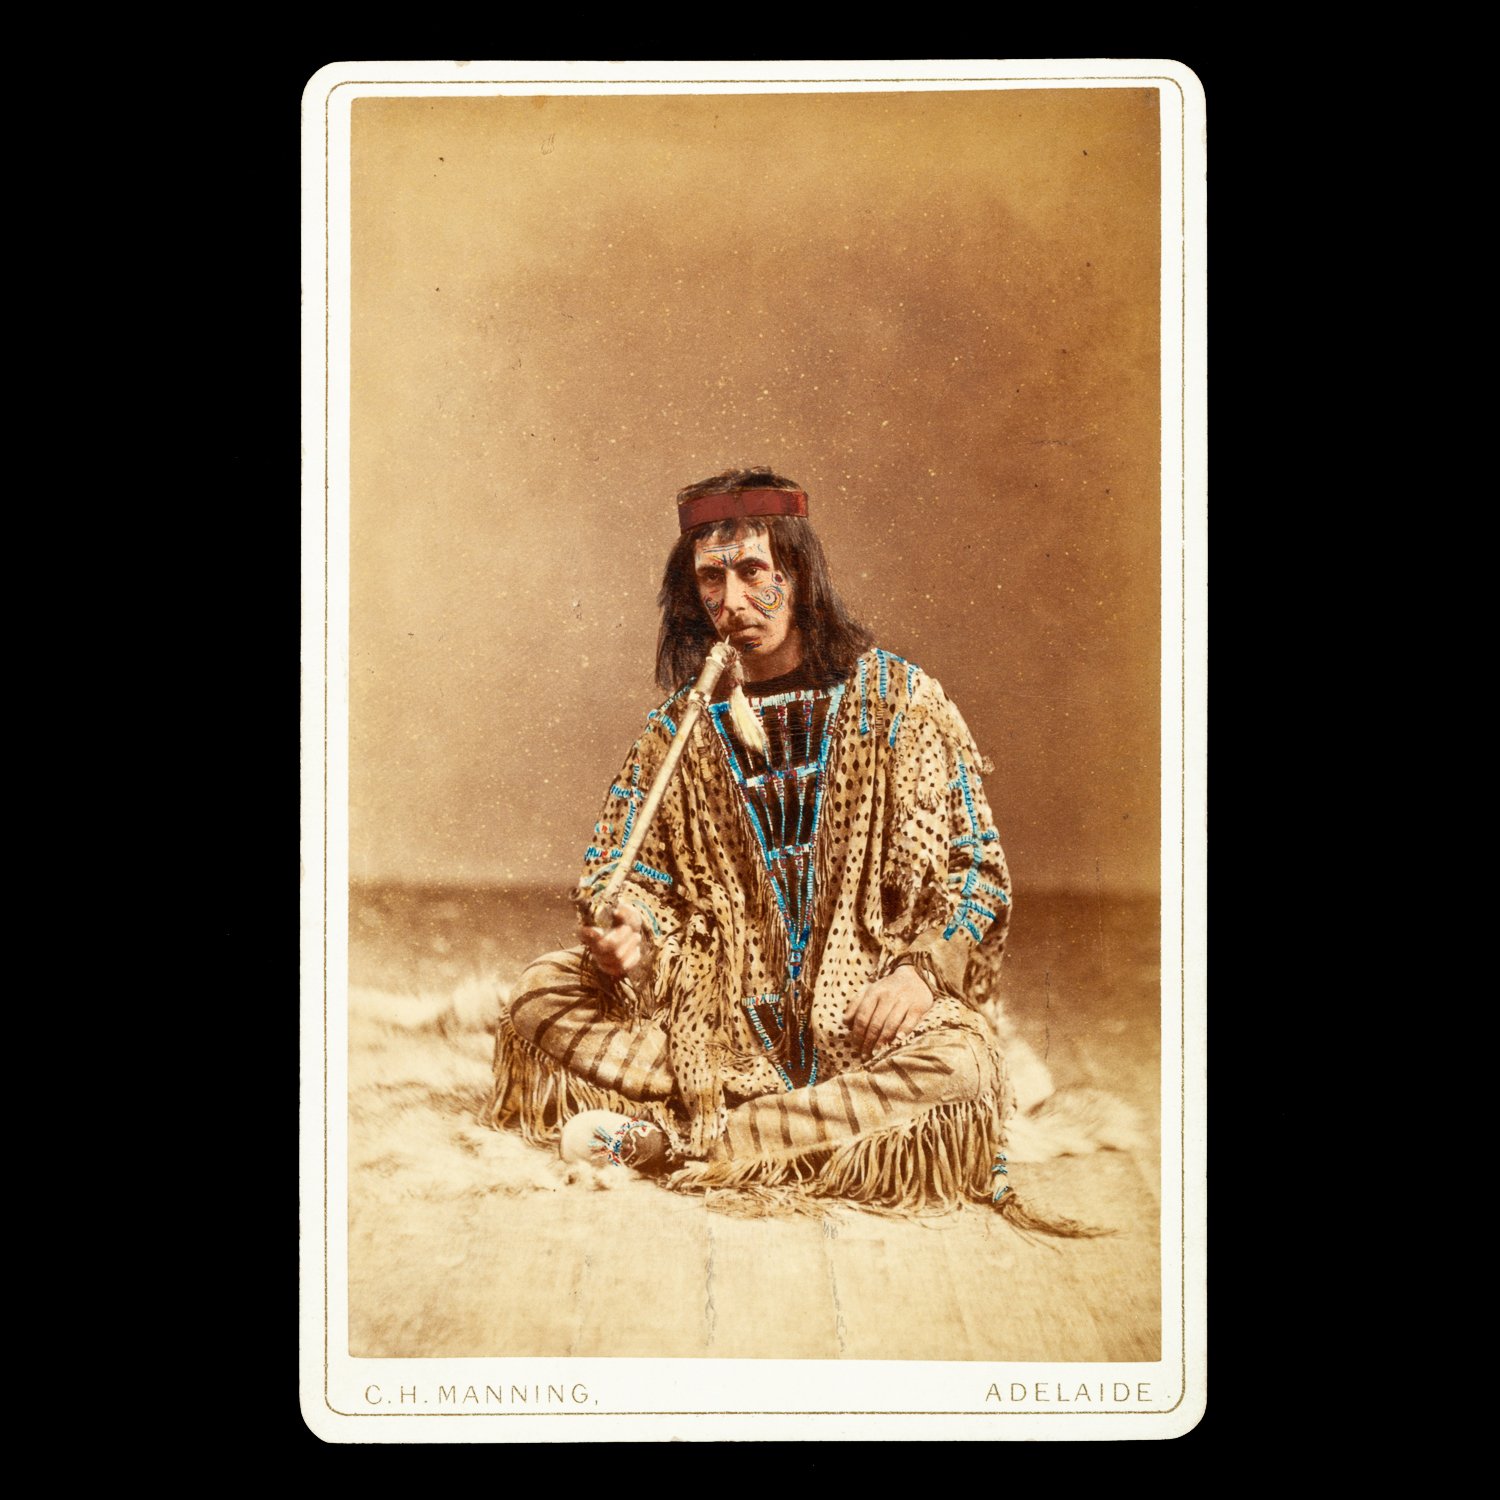 Studio portrait of Aretas William Charles Young dressed as a Native American. Adelaide, late 1870s.